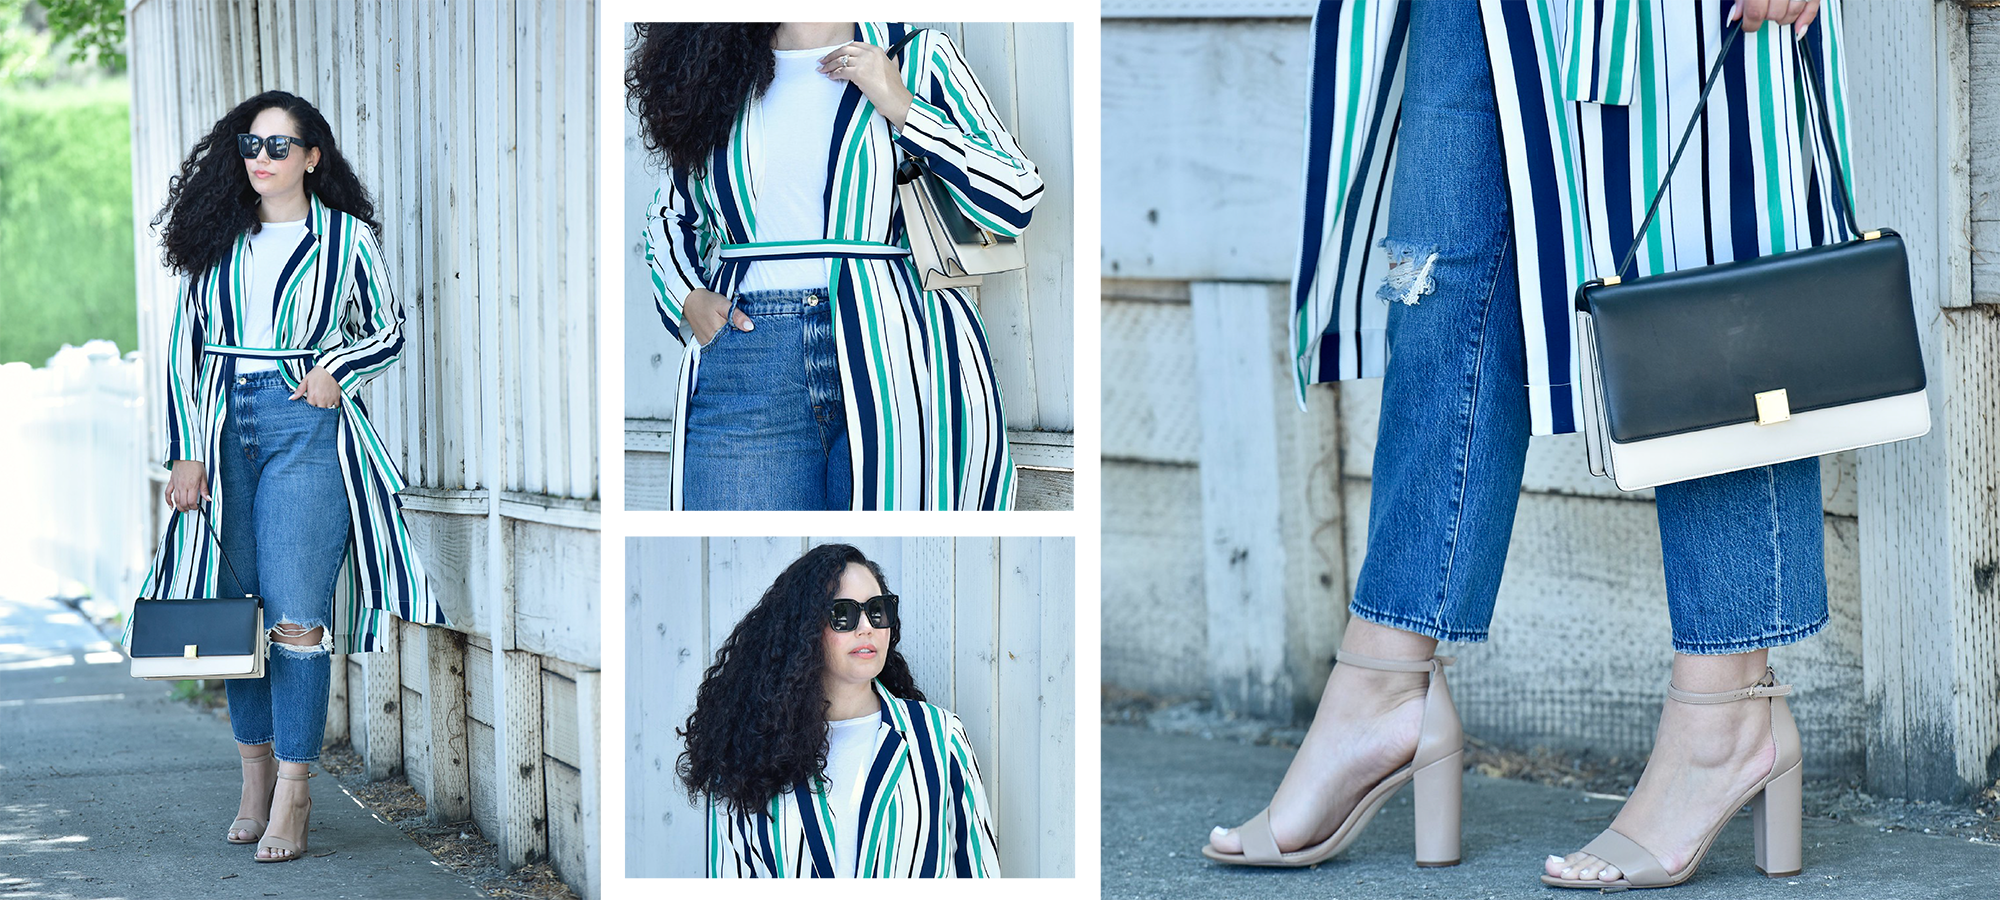 Wardrobe Must Have Soft, Summer Duster Via @GirlWithCurves #boyfriend #jeans #trench #summer #stripes